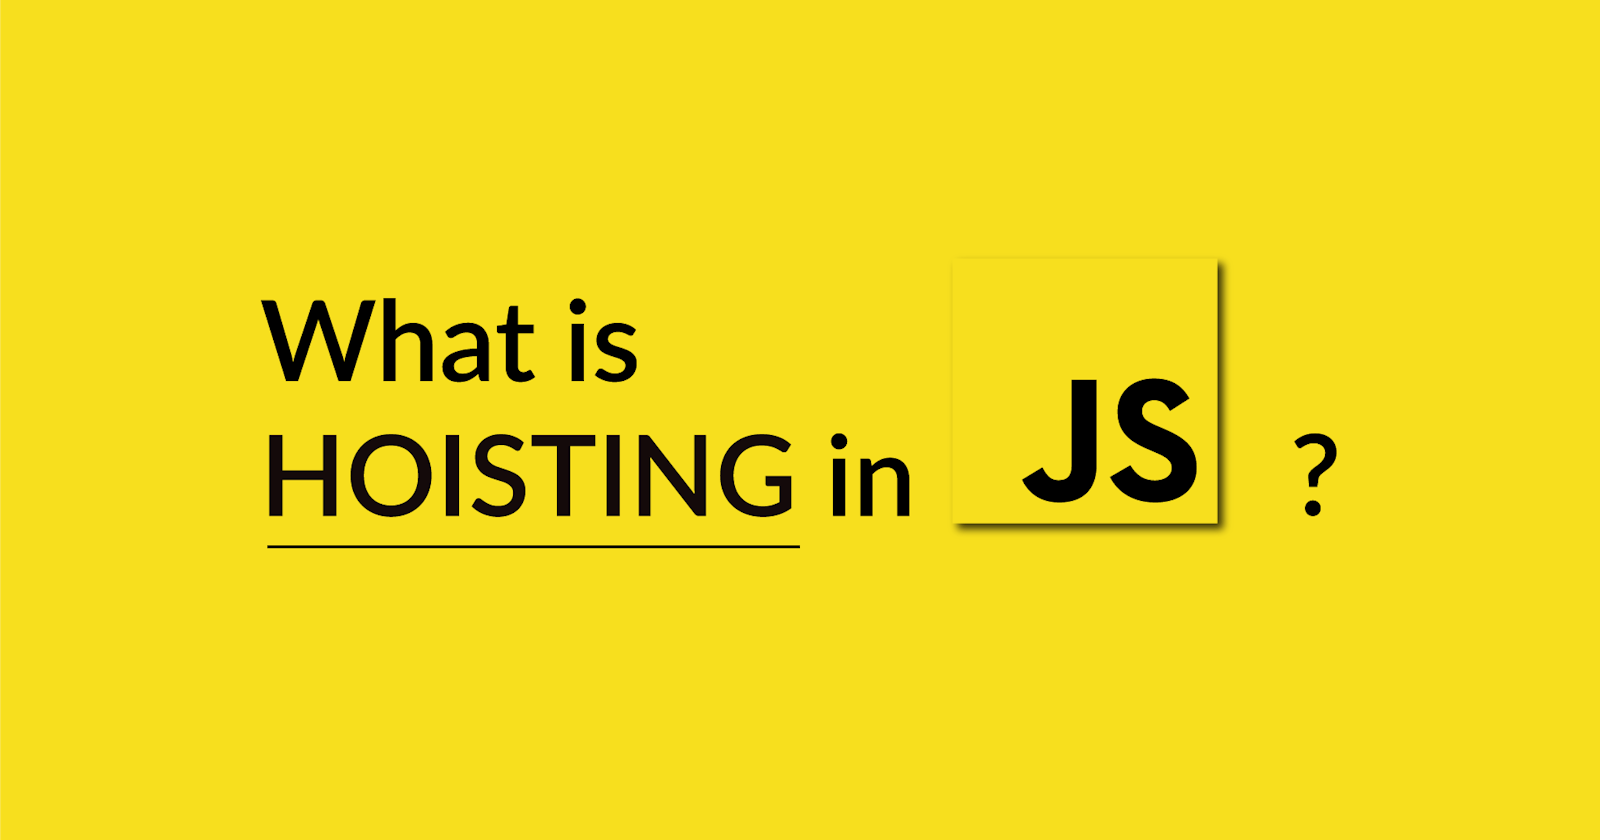 What is Hoisting in JS??